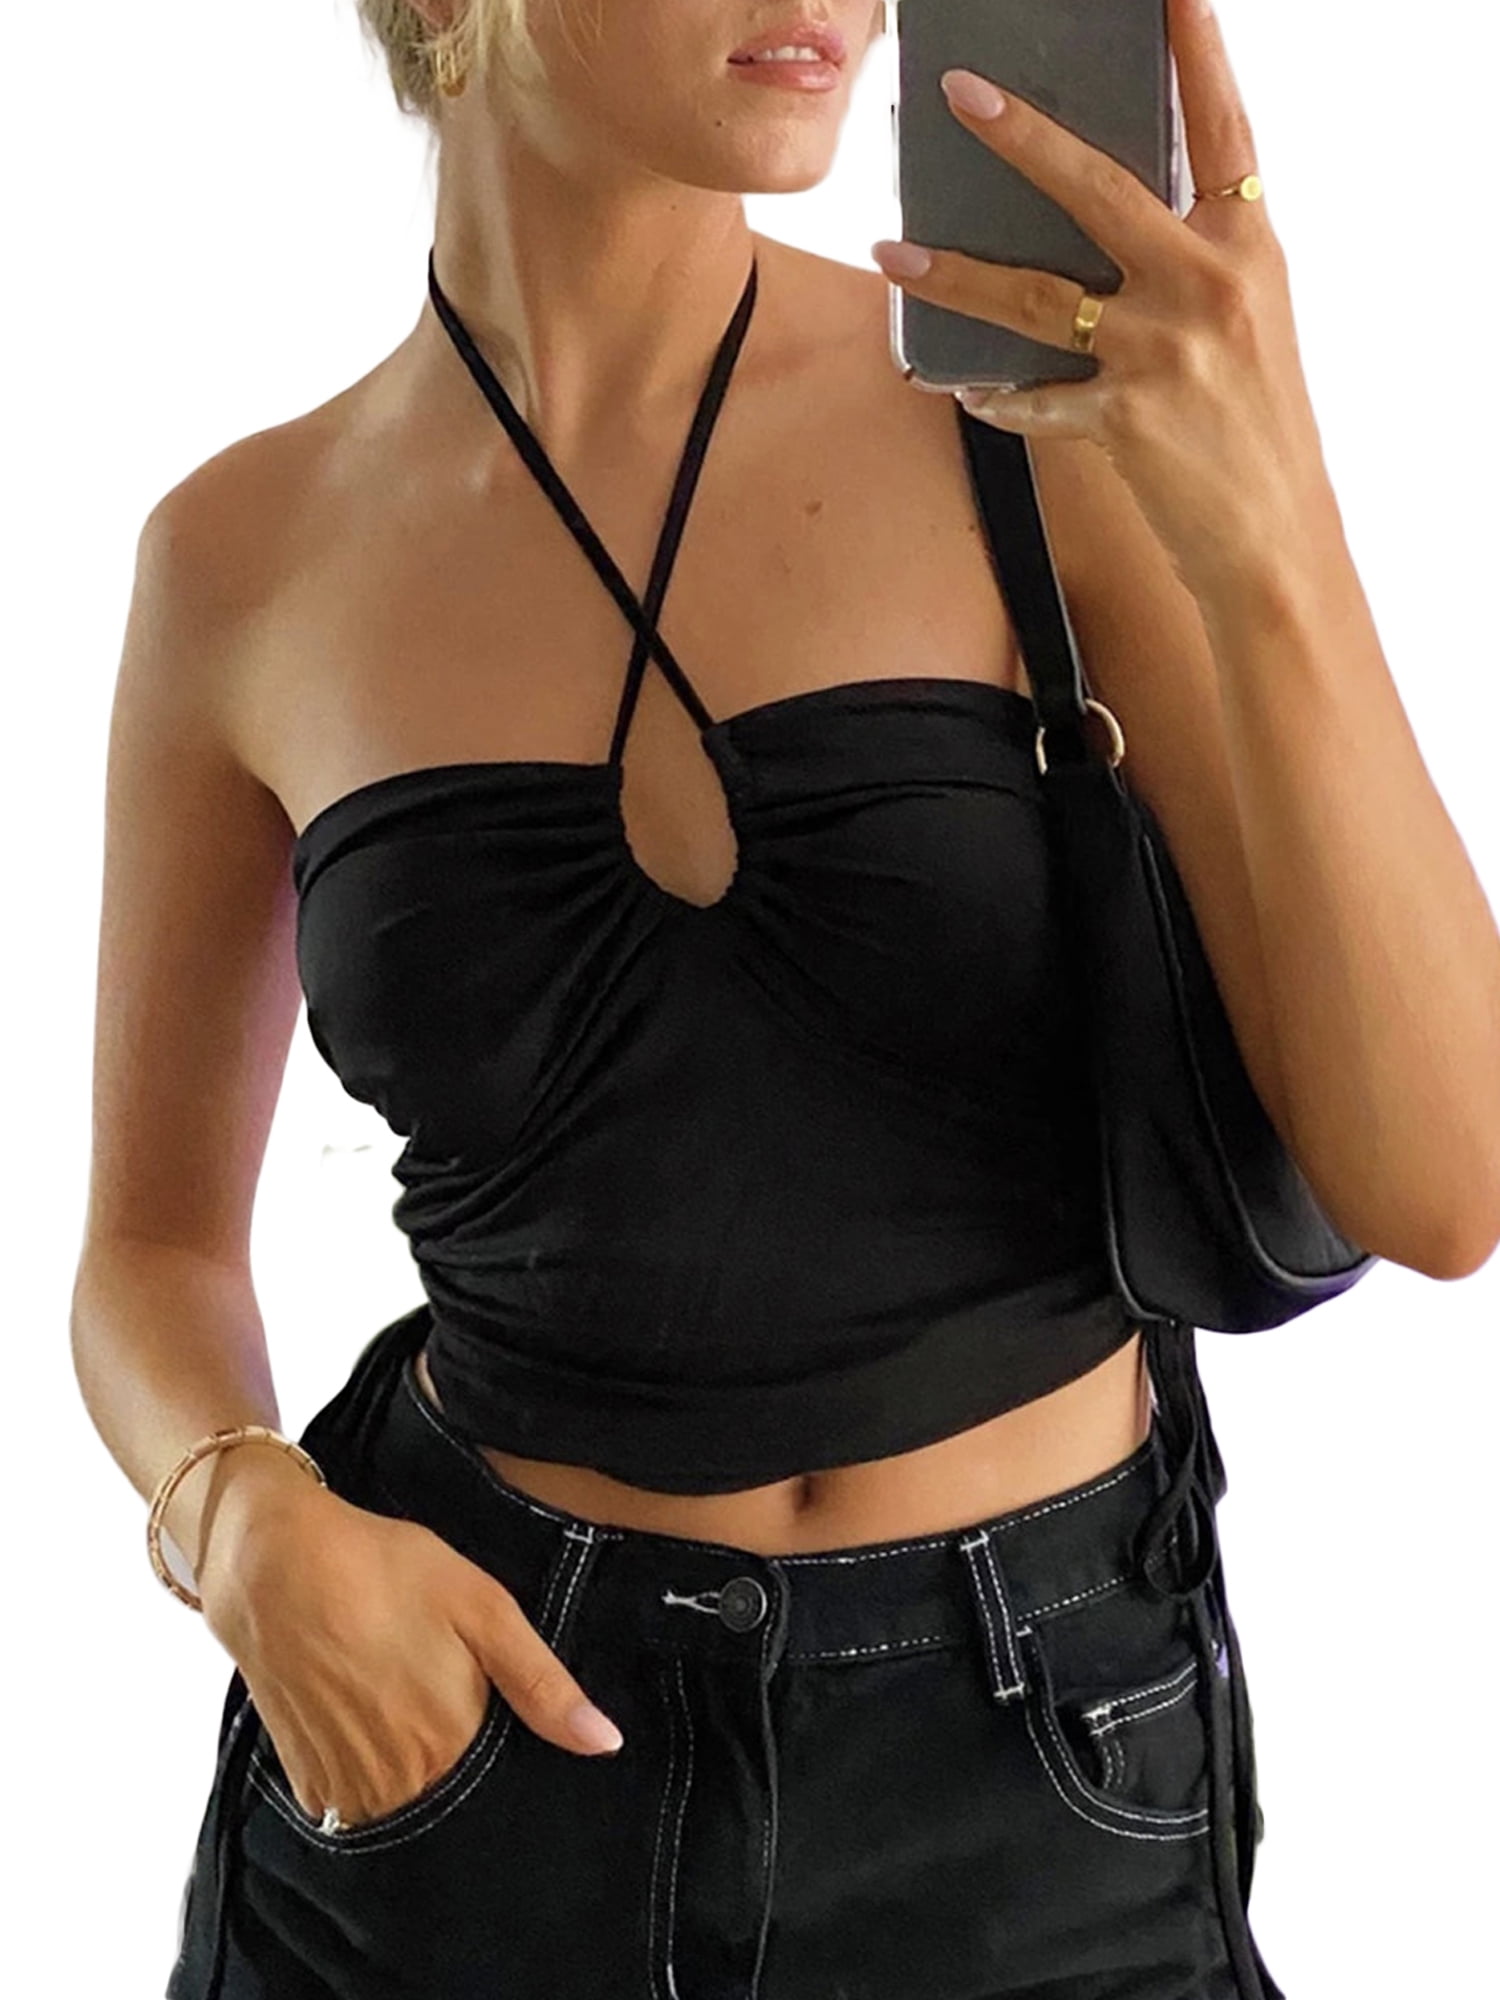 Chic Tanks & Camisoles Top With Built In Bra, Halter Off Shoulder Crop Top,  Hollow Out Camisole, Solid Color, And Backless Design From Pangxiea, $13.78